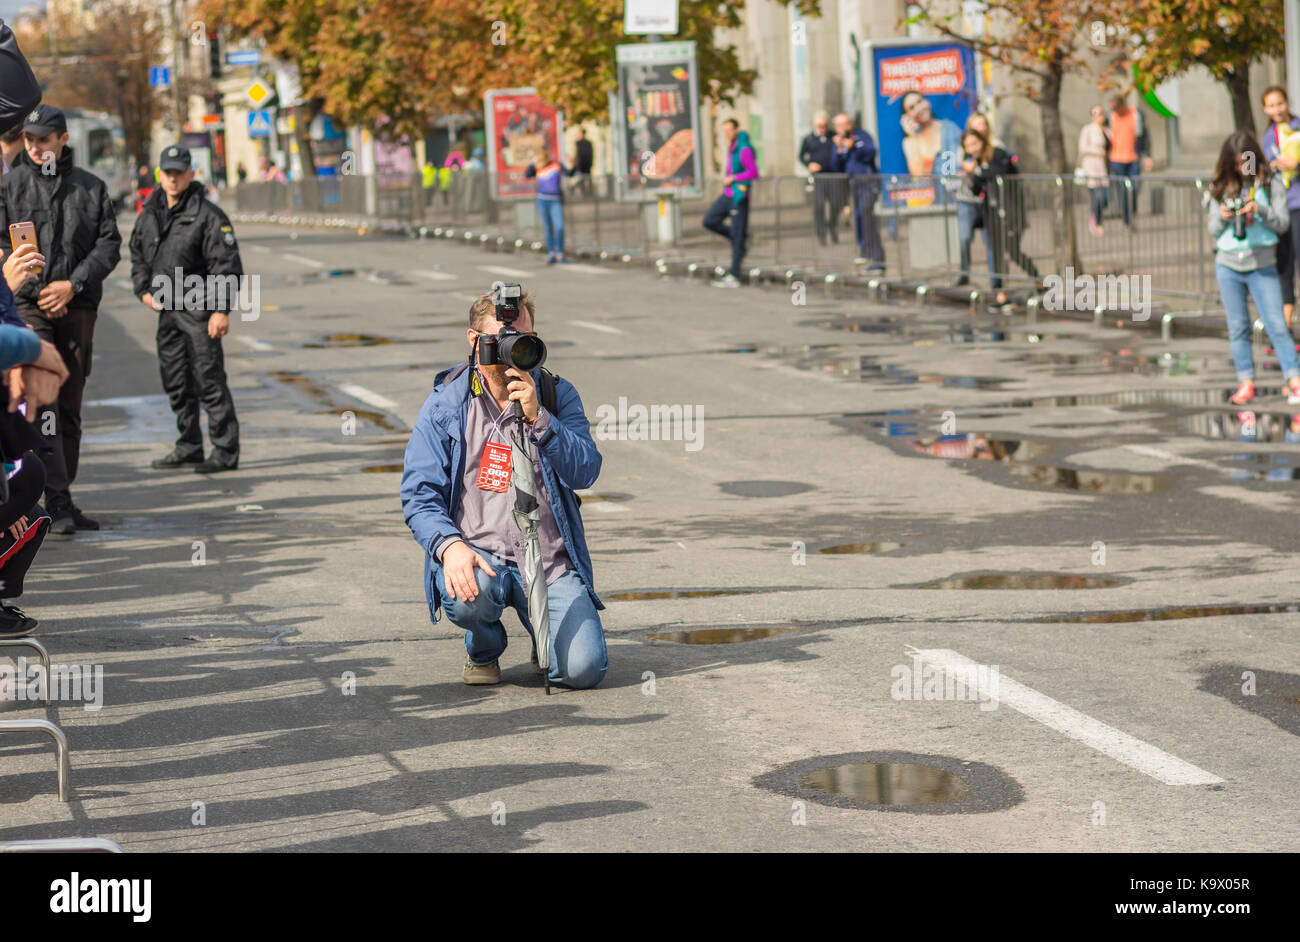 DNEPR, UKRAINE - SEPTEMBER 24, 2017:Accredited sitting on a street and waiting for race start during 'Dnipro ATB Marathon' on the city street at September 24, 2017 in Dnepr, Ukraine Credit: Yuri Kravchenko/Alamy Live News Stock Photo